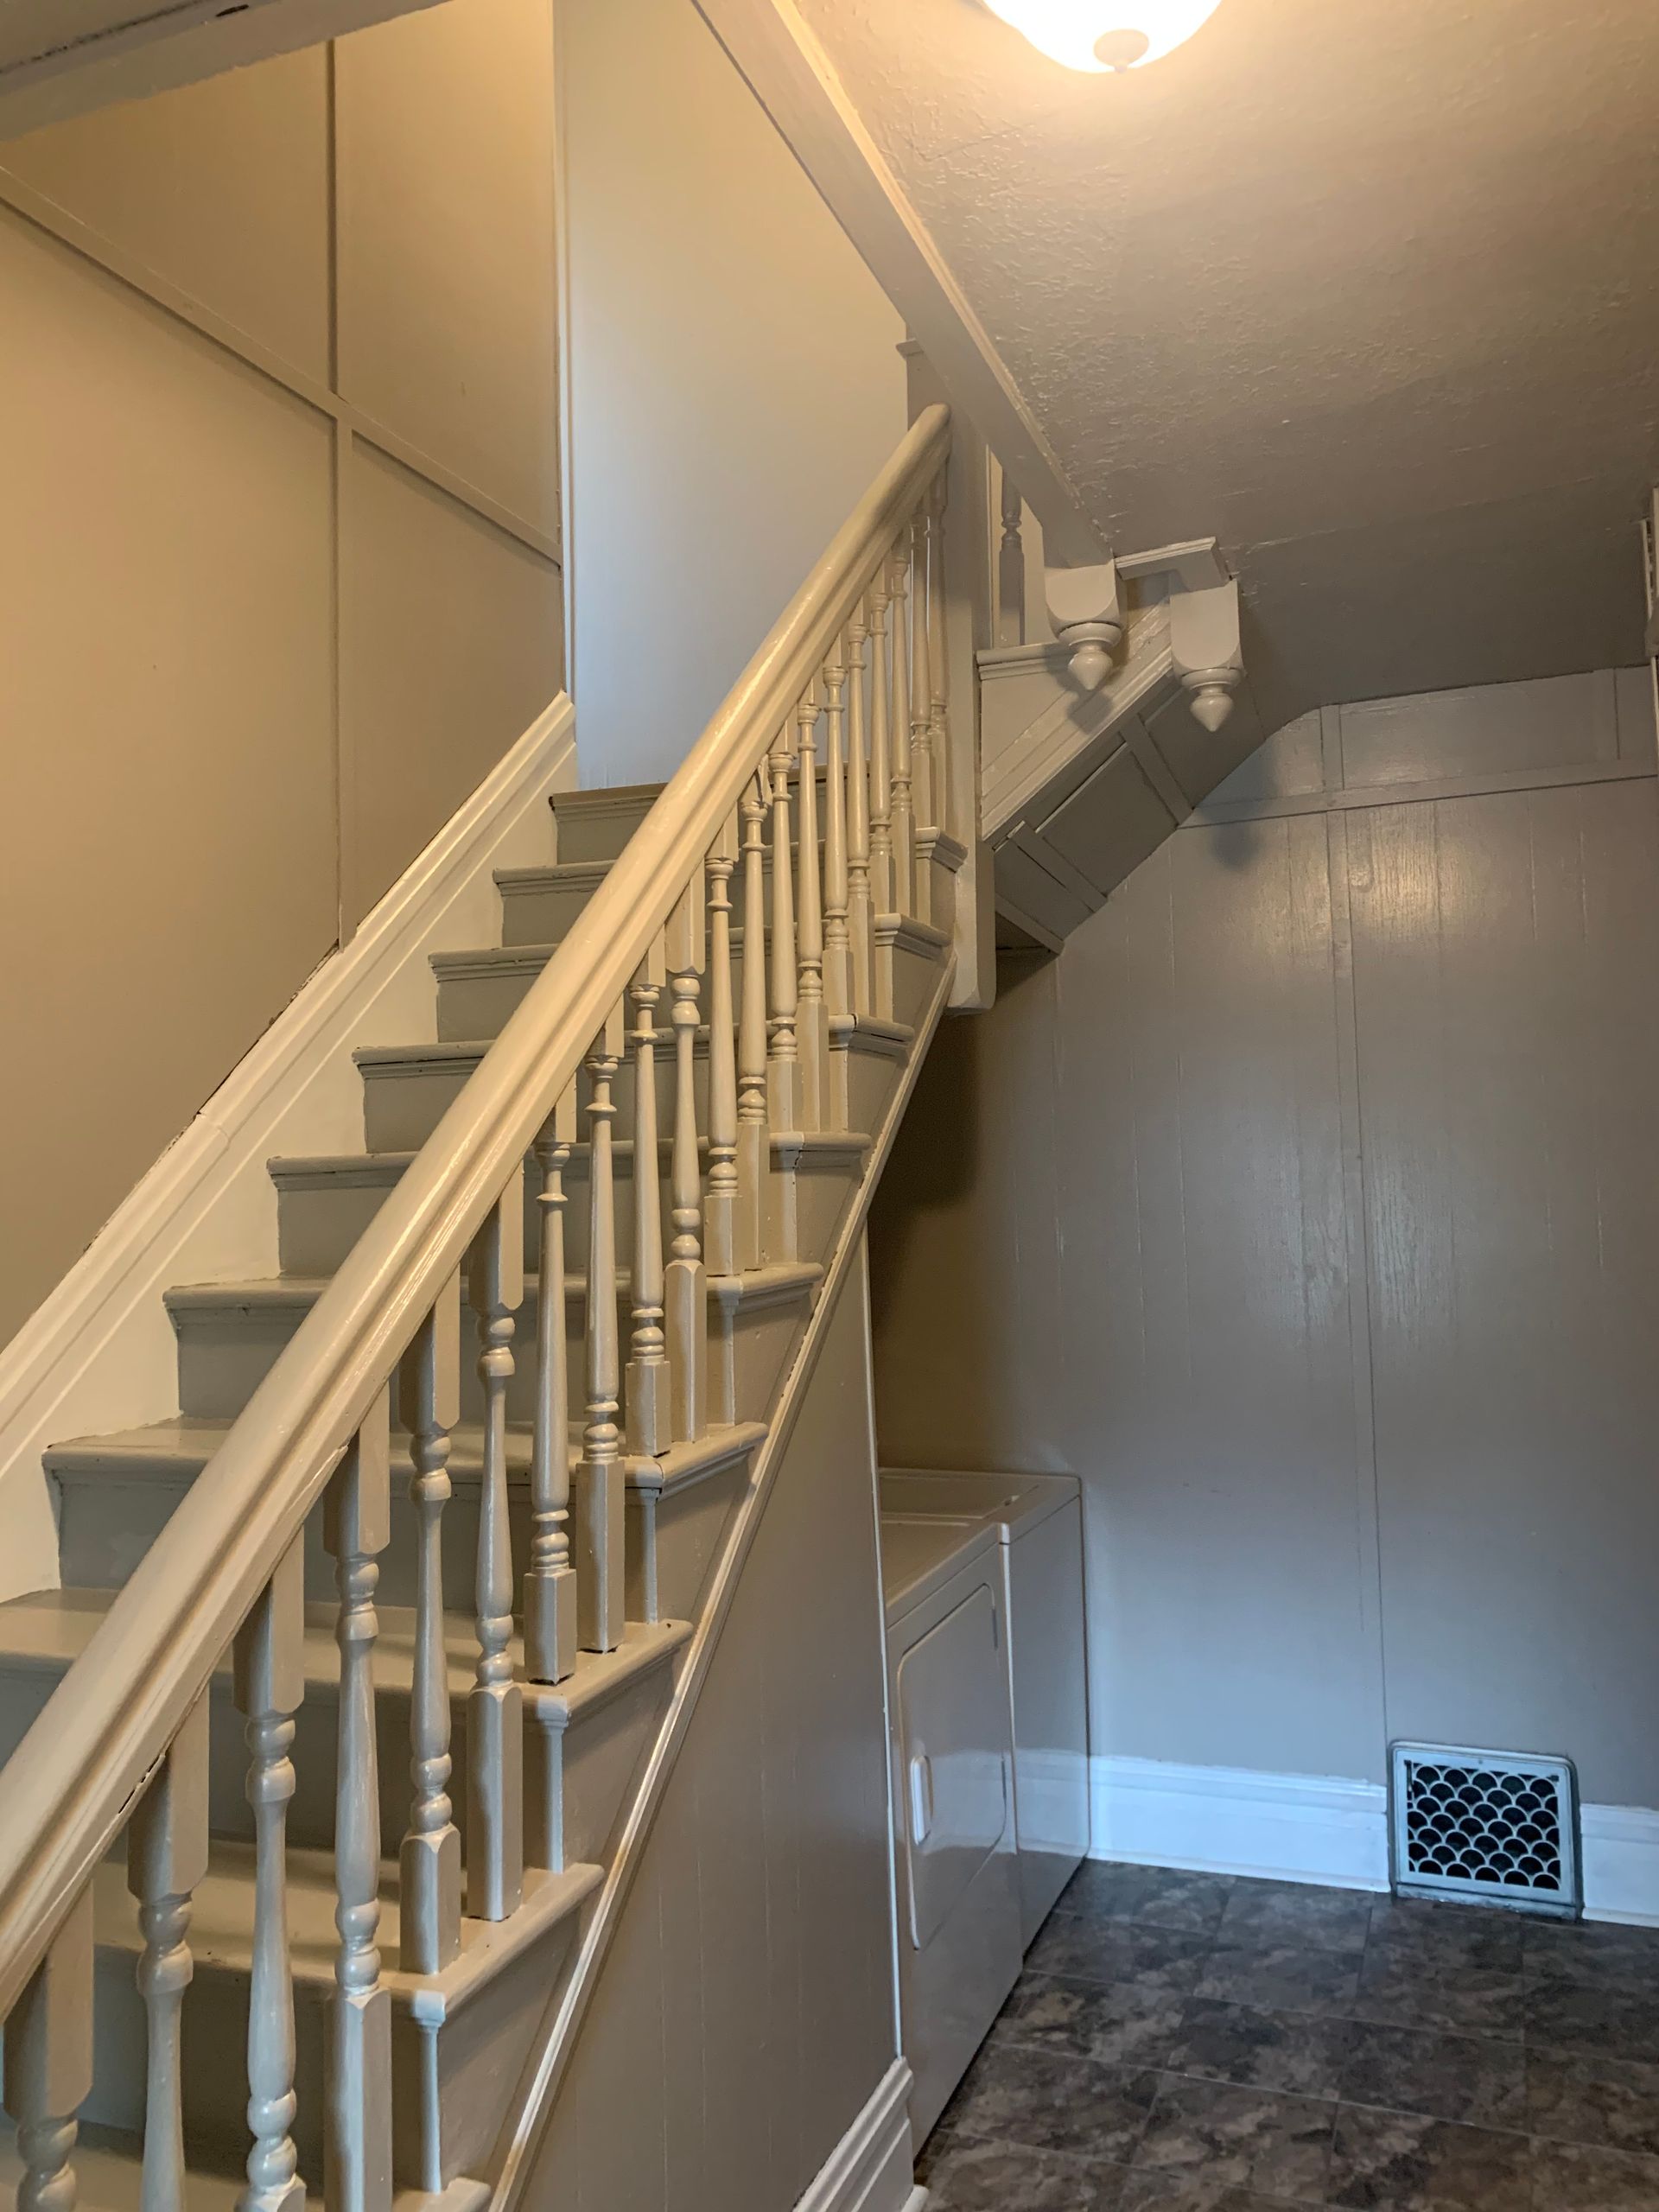 A staircase in a house with a white railing